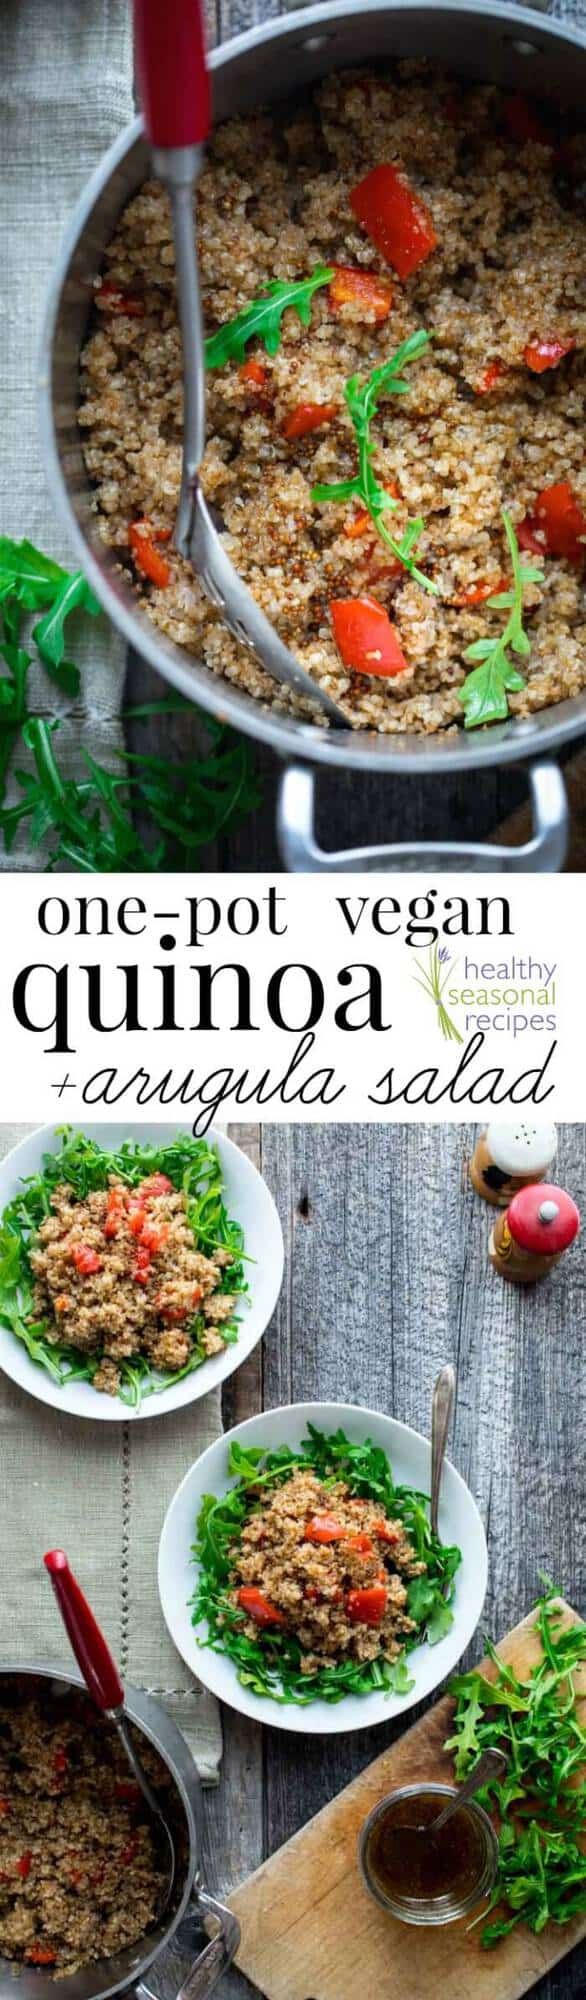 The finished Quinoa and arugula with text